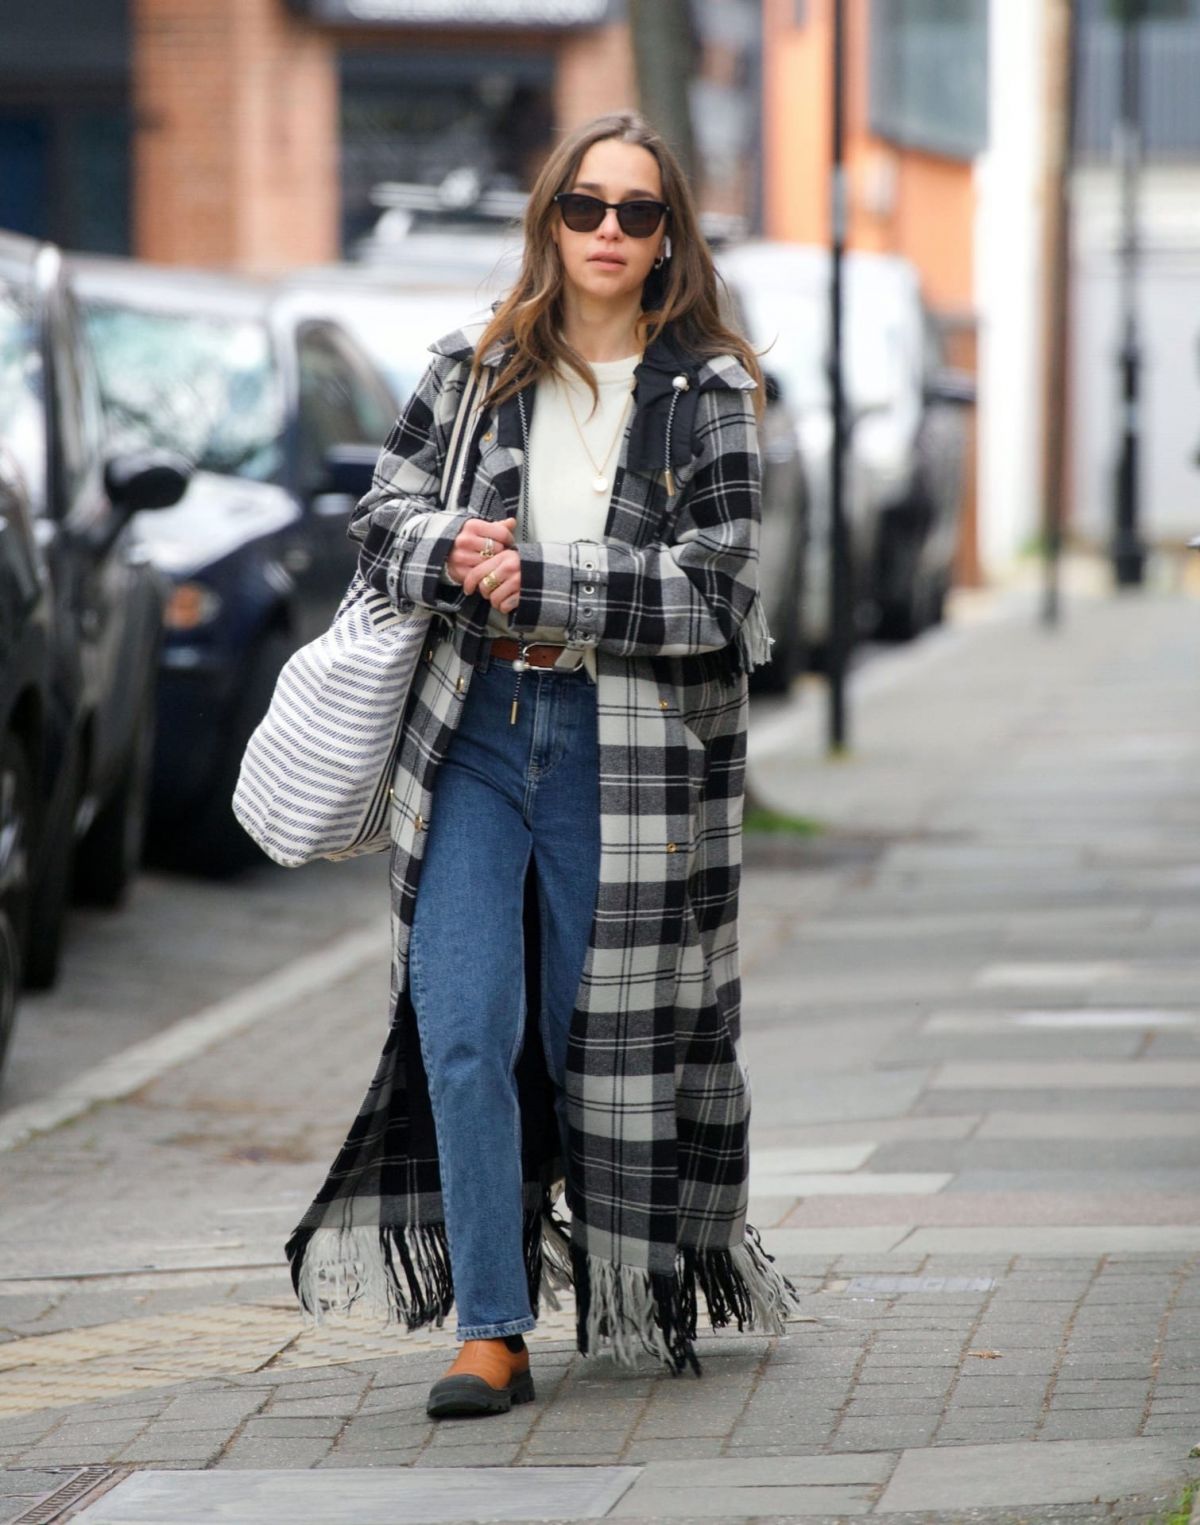 EMILIA CLARKE Out and About in London 05/02/2021 – HawtCelebs